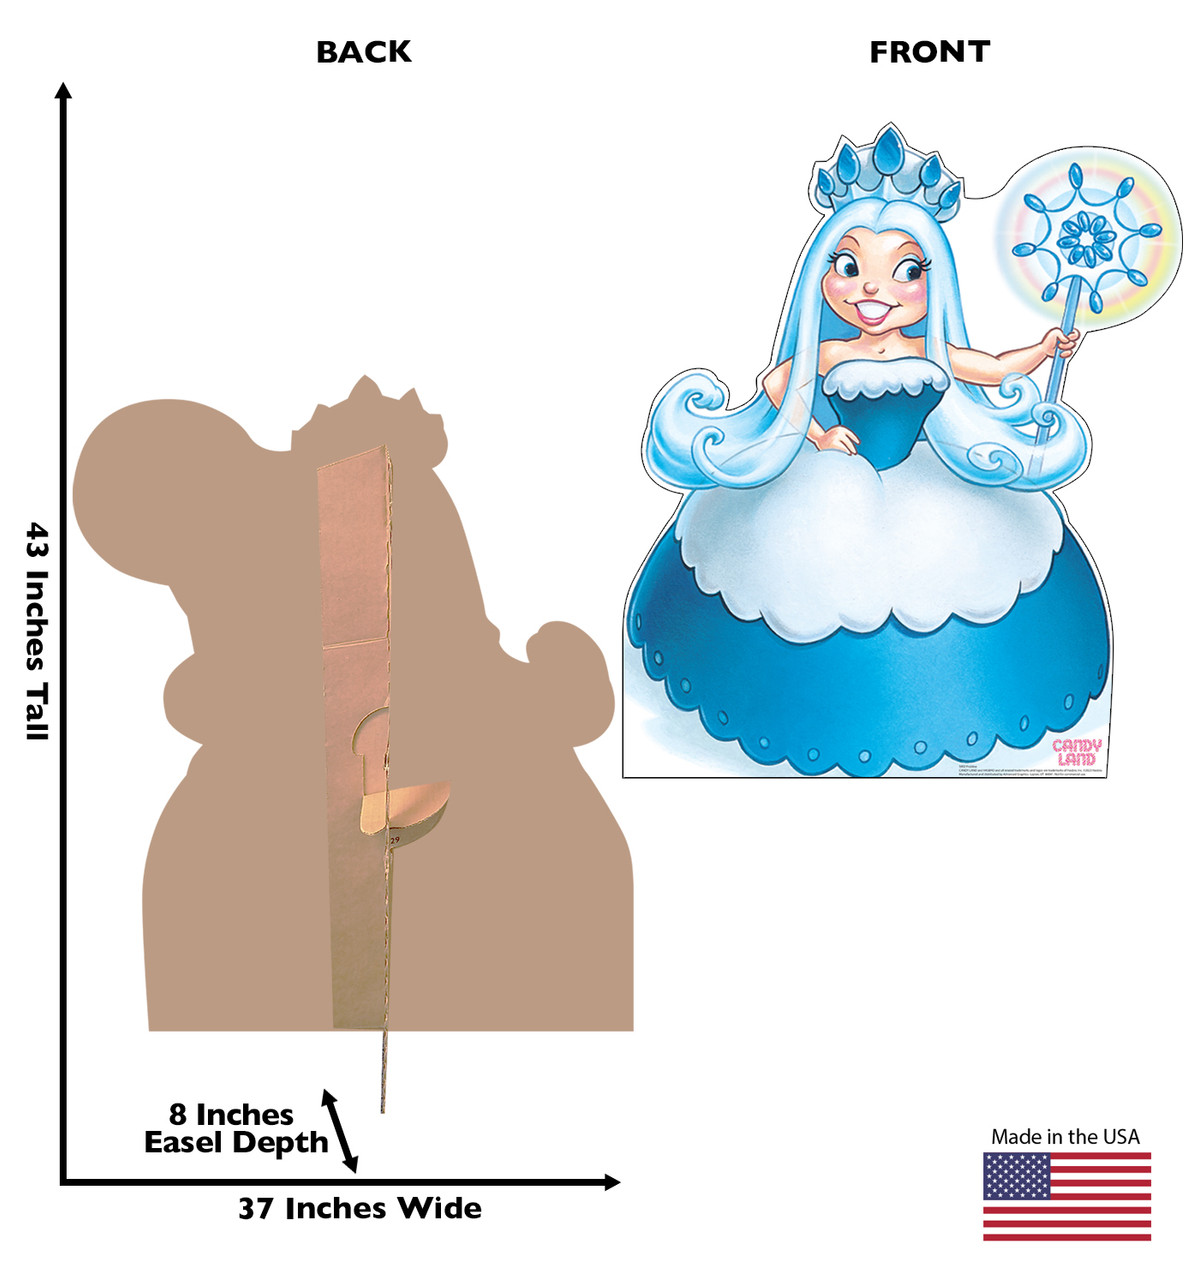 Life-size cardboard standee of Frostine from Candy Land with front and back dimensions.